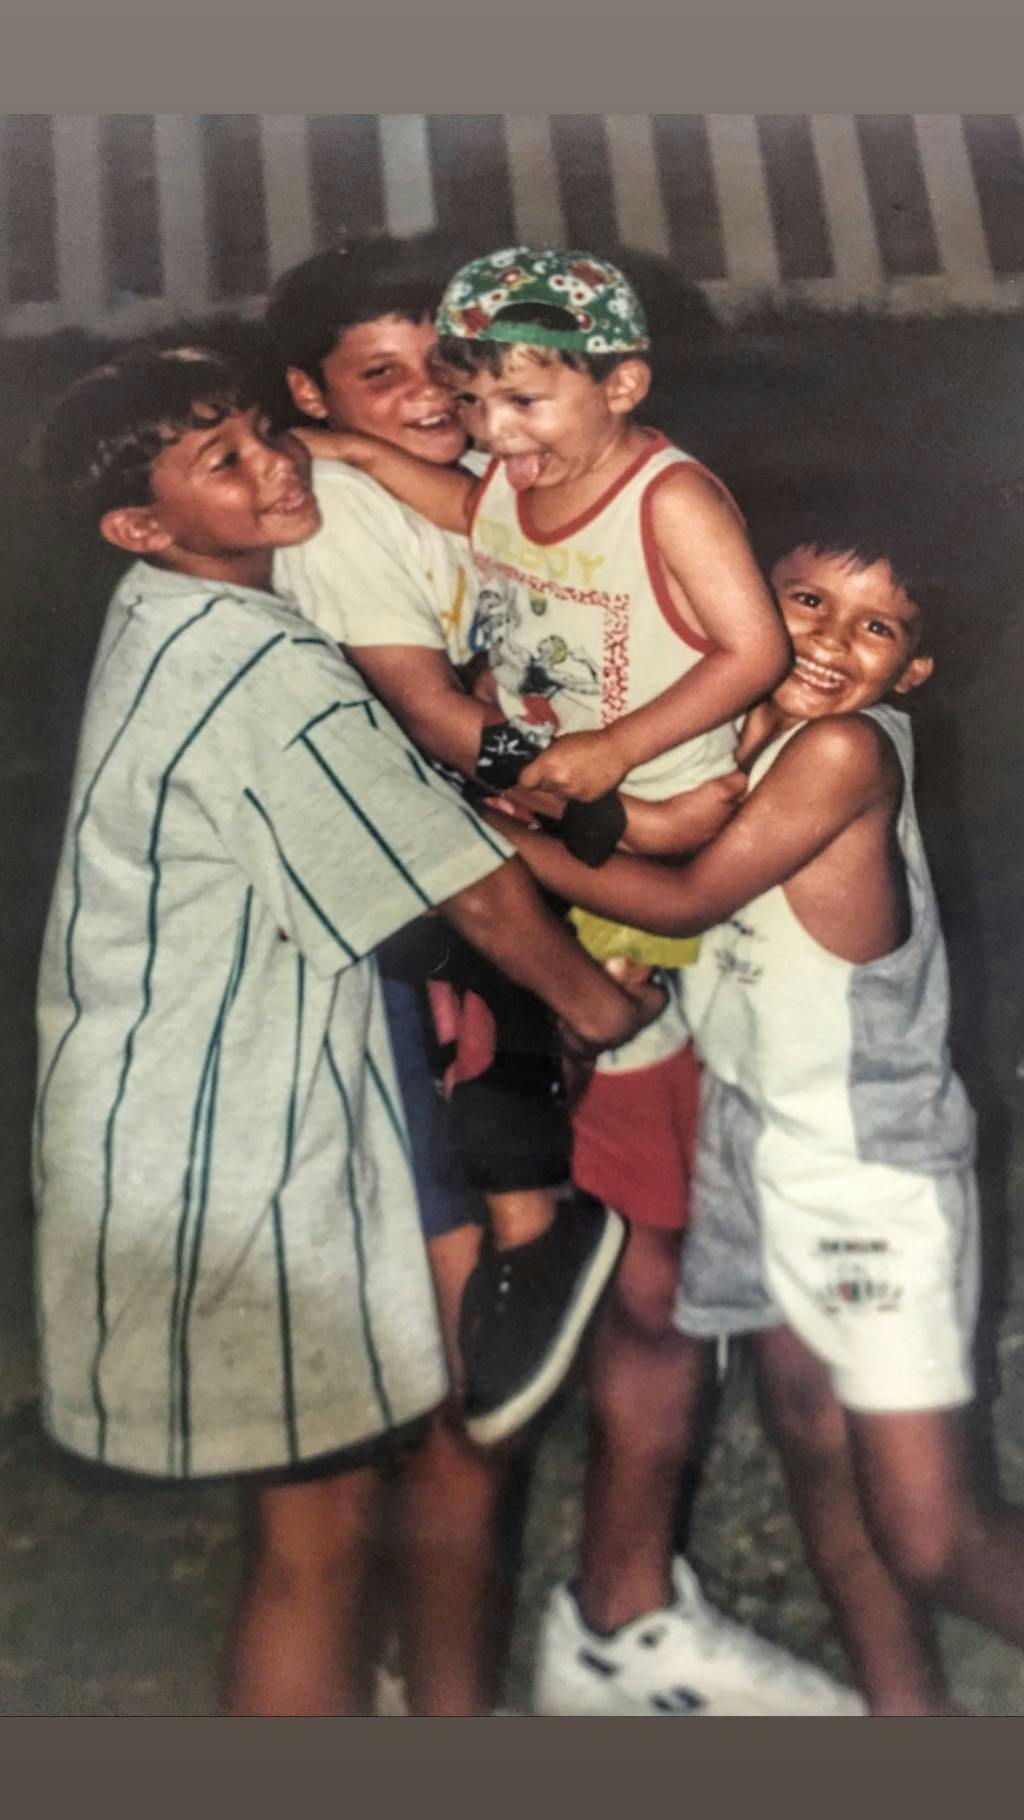 Me and my cousins carrying my little brother on one of our trips to the beach.